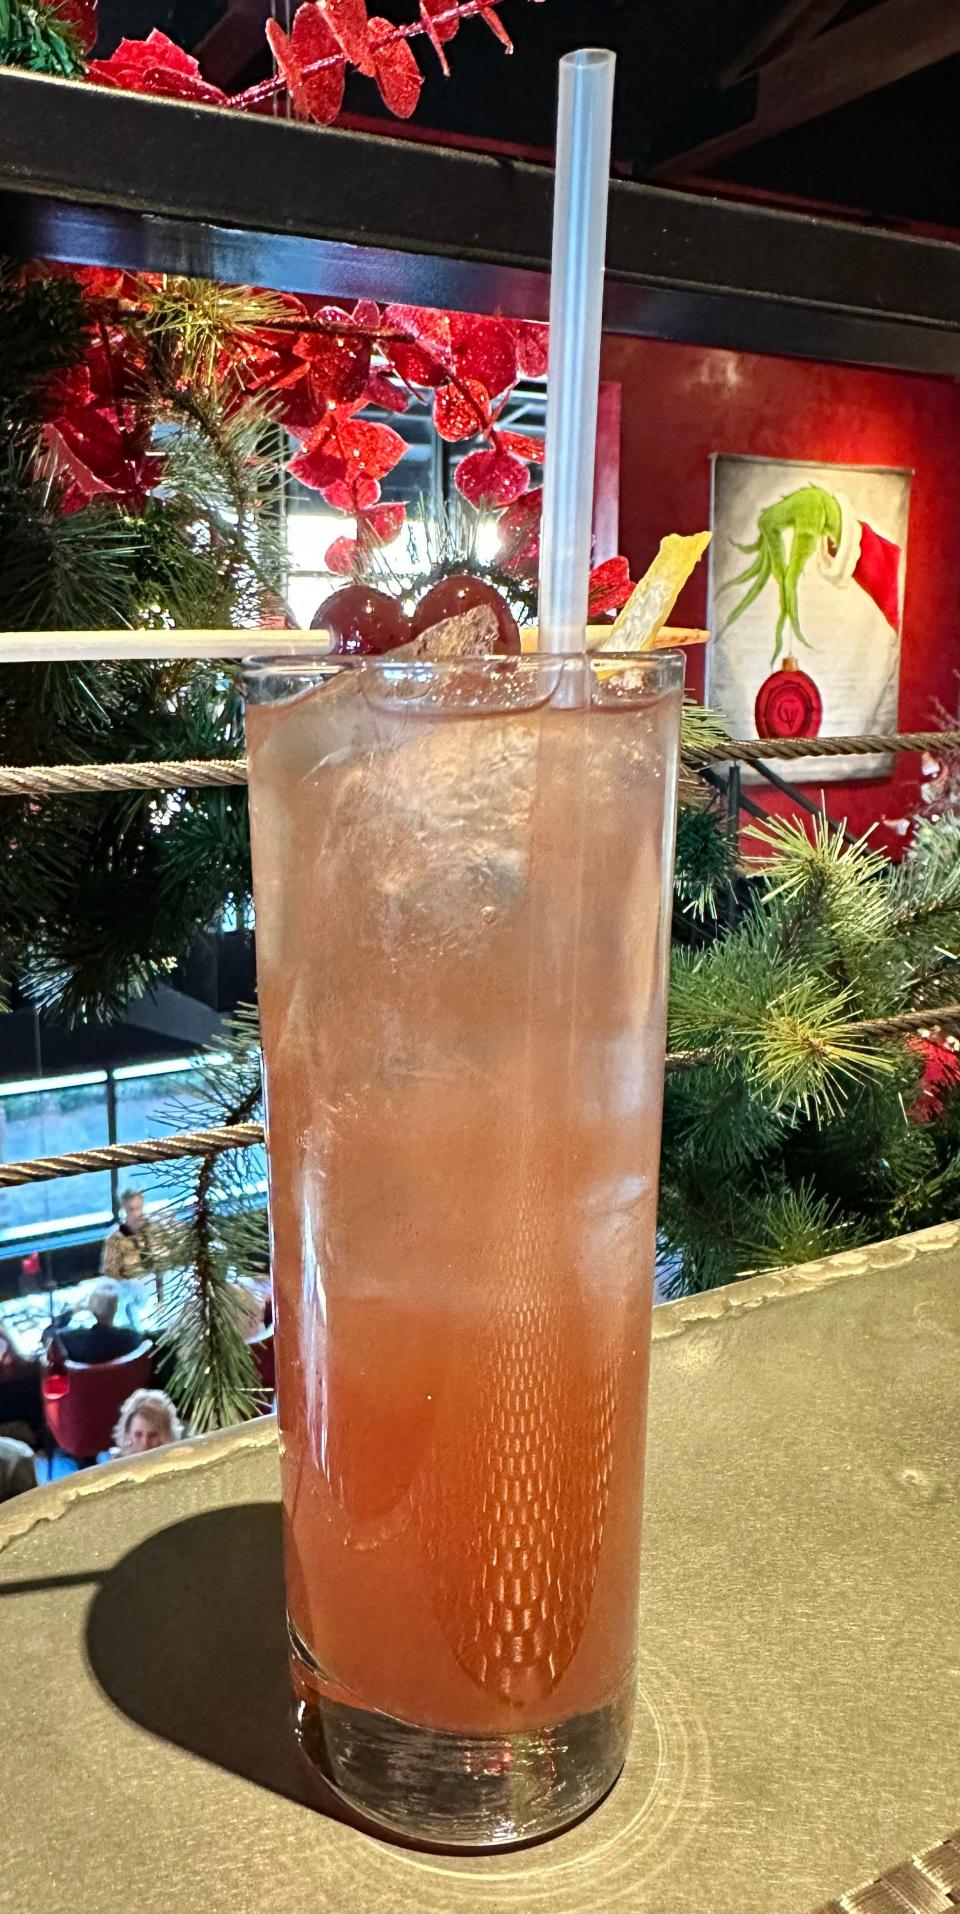 A cherry black tea cocktail at The Crush House in Canton features vodka and cold-brewed black tea.